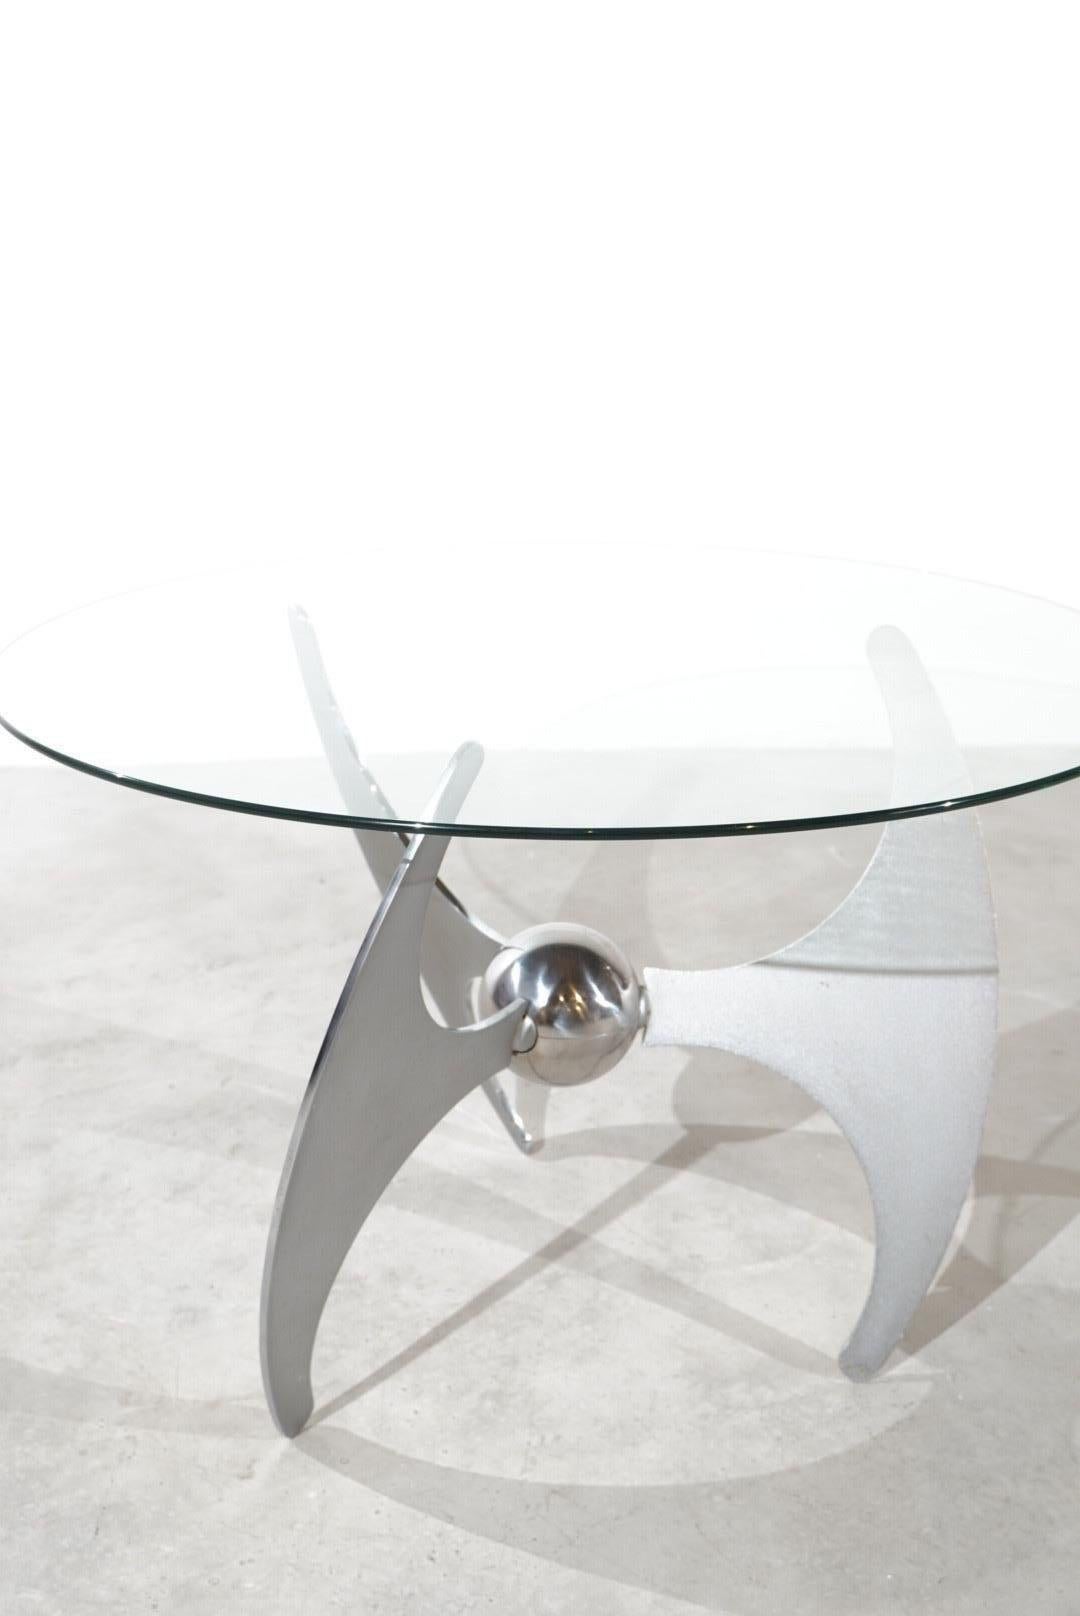 Steel Space Age Adjustable Coffee Table/ Dining Table Luciano Campanini Propeller Glas For Sale